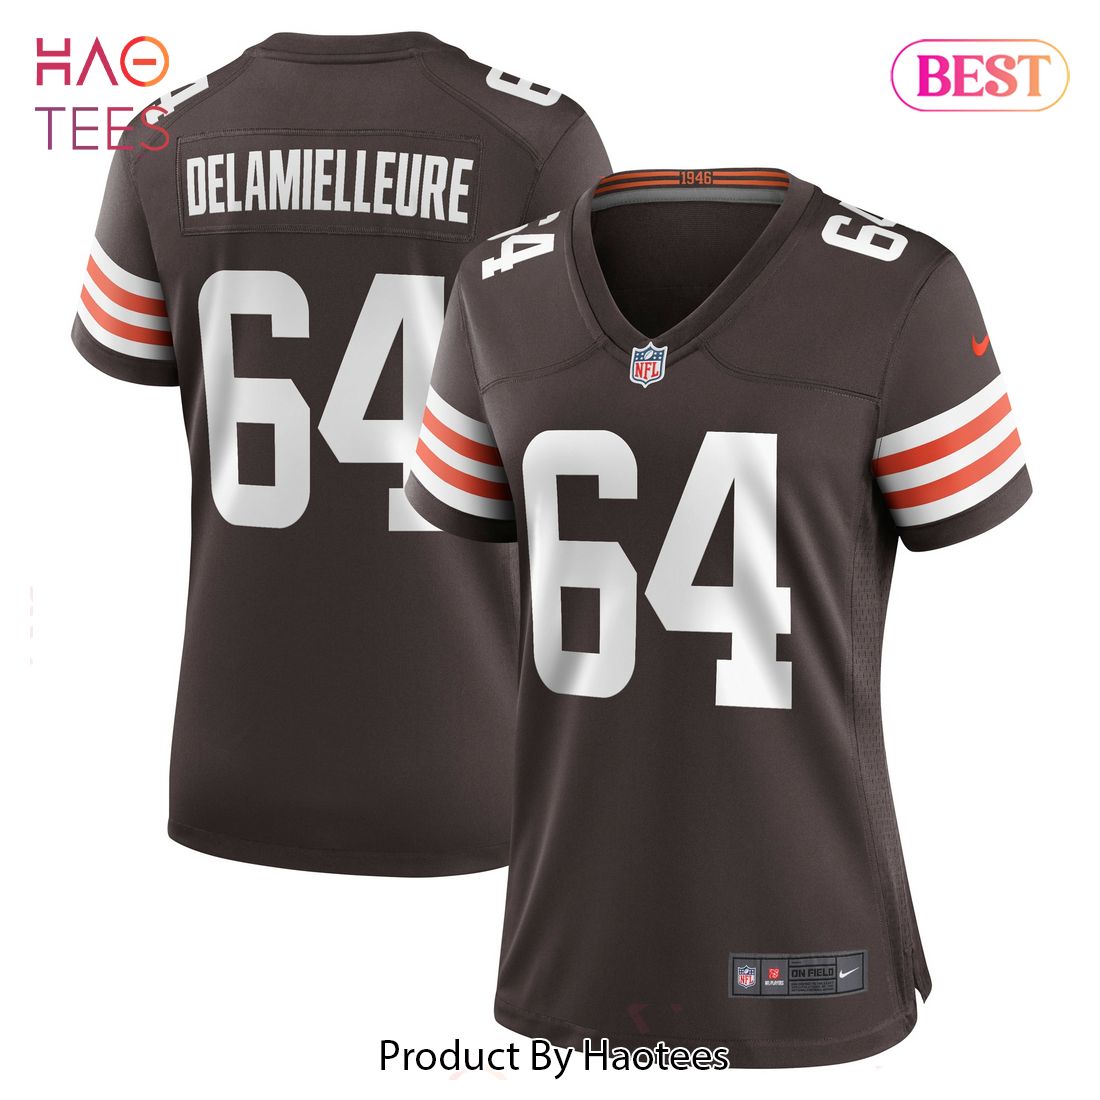 Joe DeLamielleure Cleveland Browns Nike Women’s Game Retired Player Jersey Brown